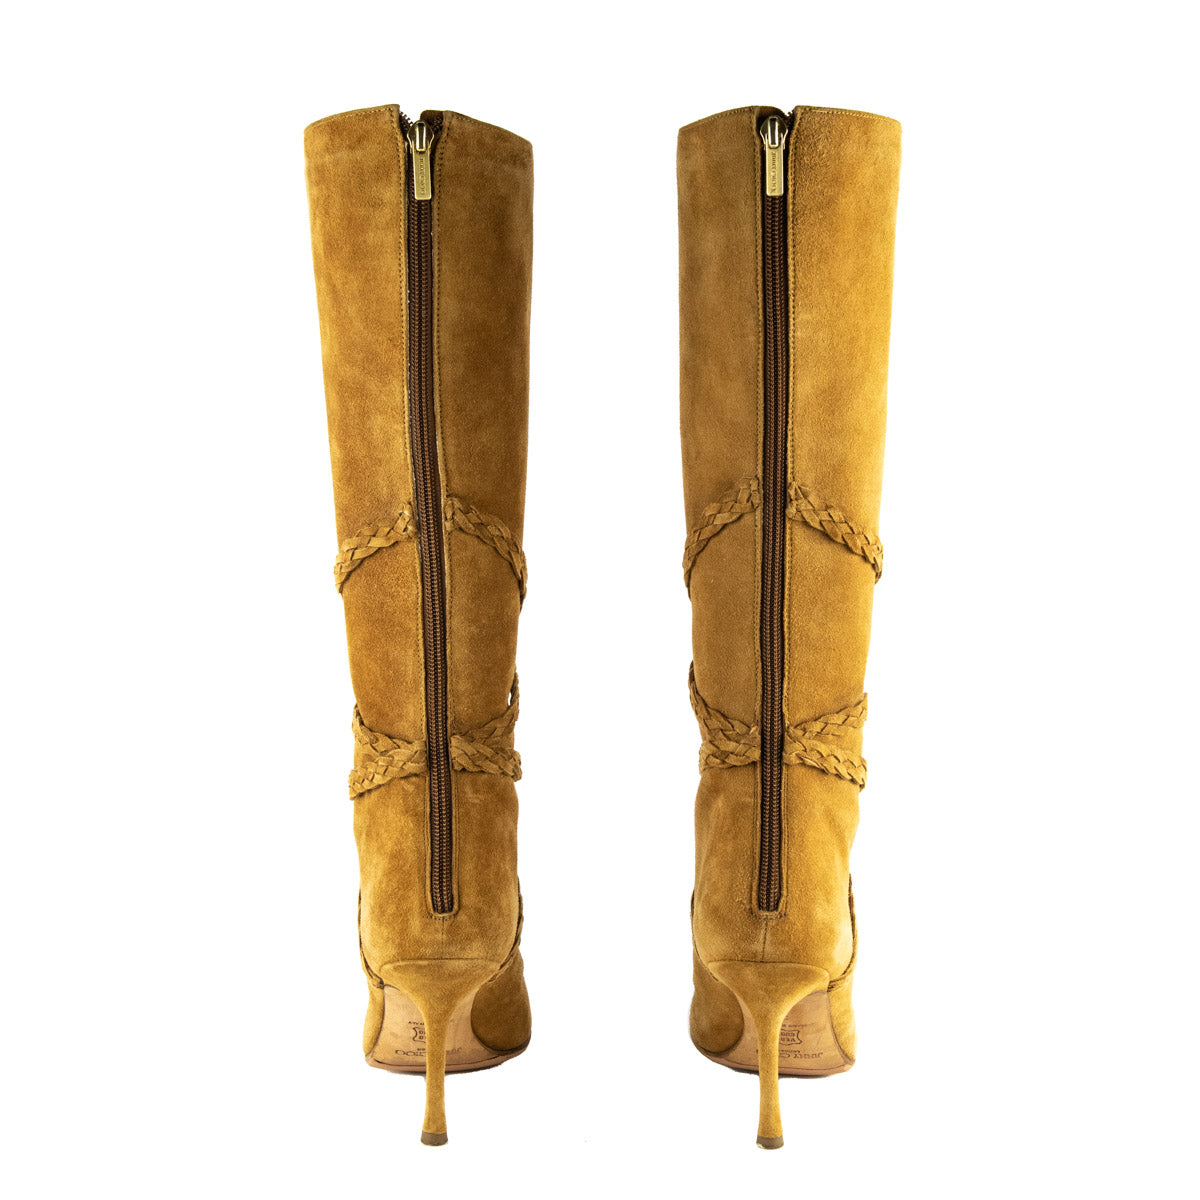 Jimmy Choo Tan Suede Knee High Boots Size US 9 | EU 39 - Love that Bag etc - Preowned Authentic Designer Handbags & Preloved Fashions